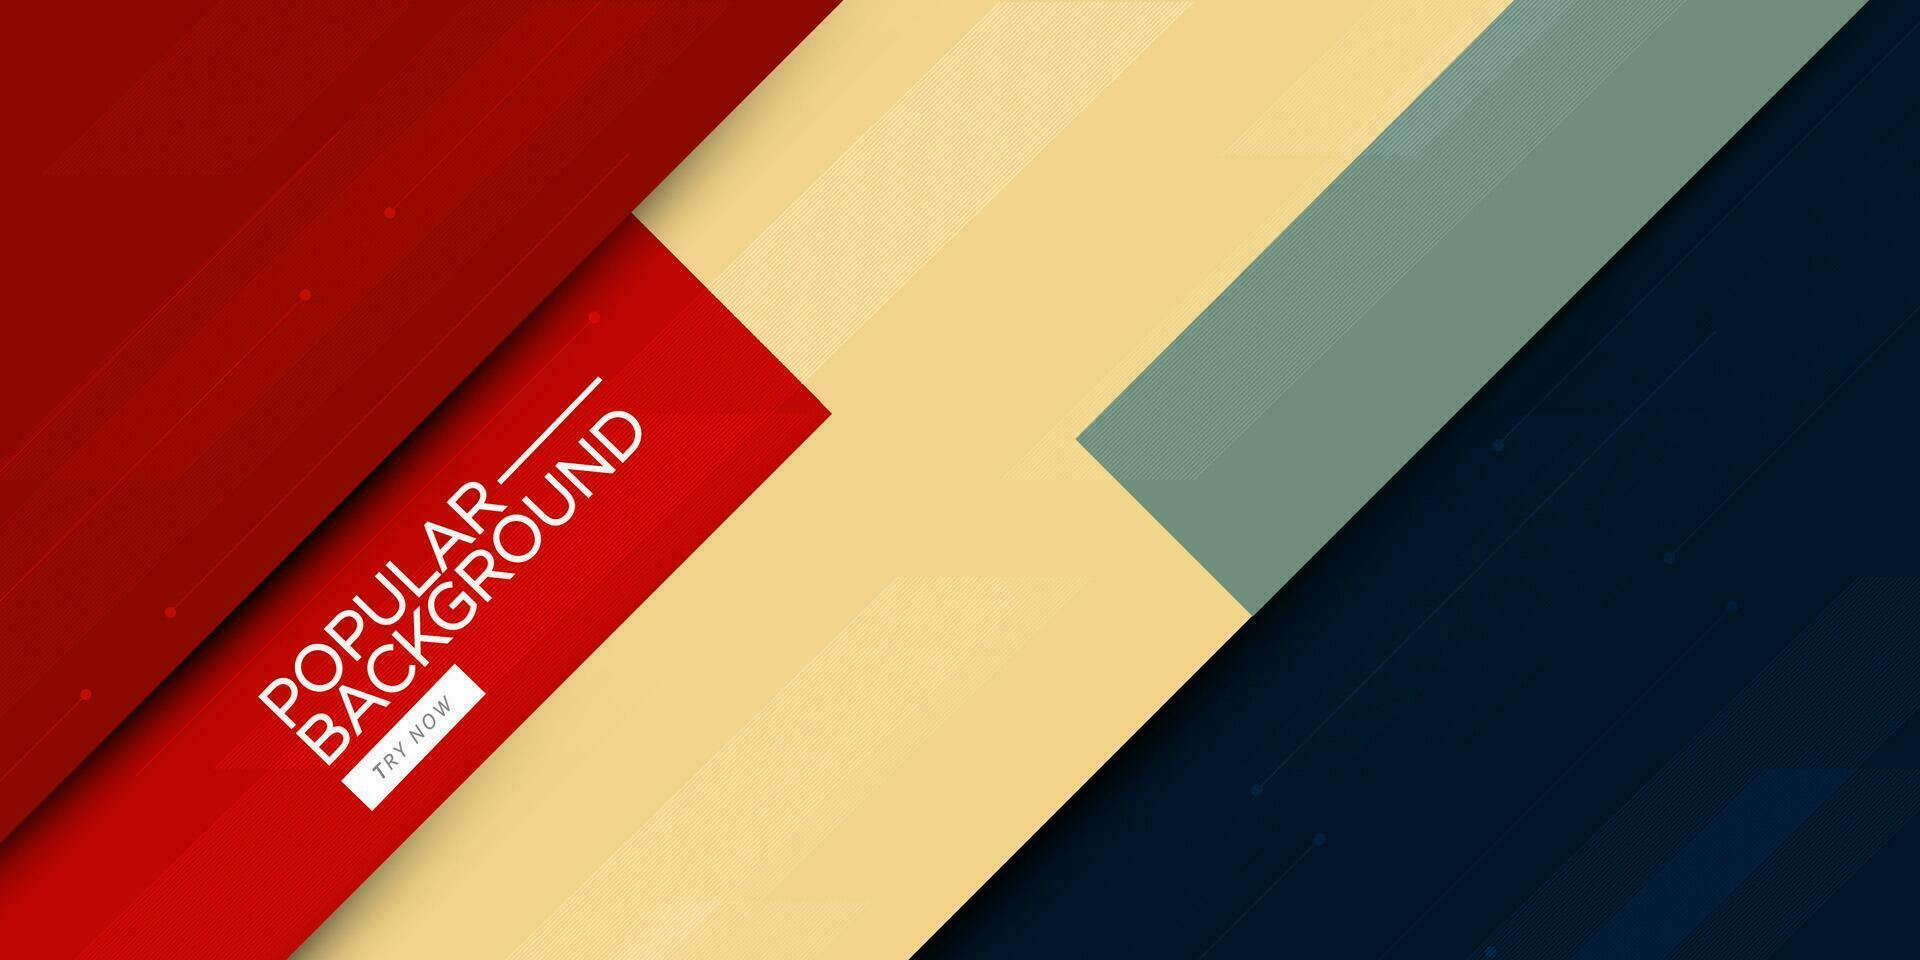 Abstract geometric dark blue, green, and red background with simple square shape and lines. Trendy 3d design. Cool and modern with overlap concept. Eps10 vector